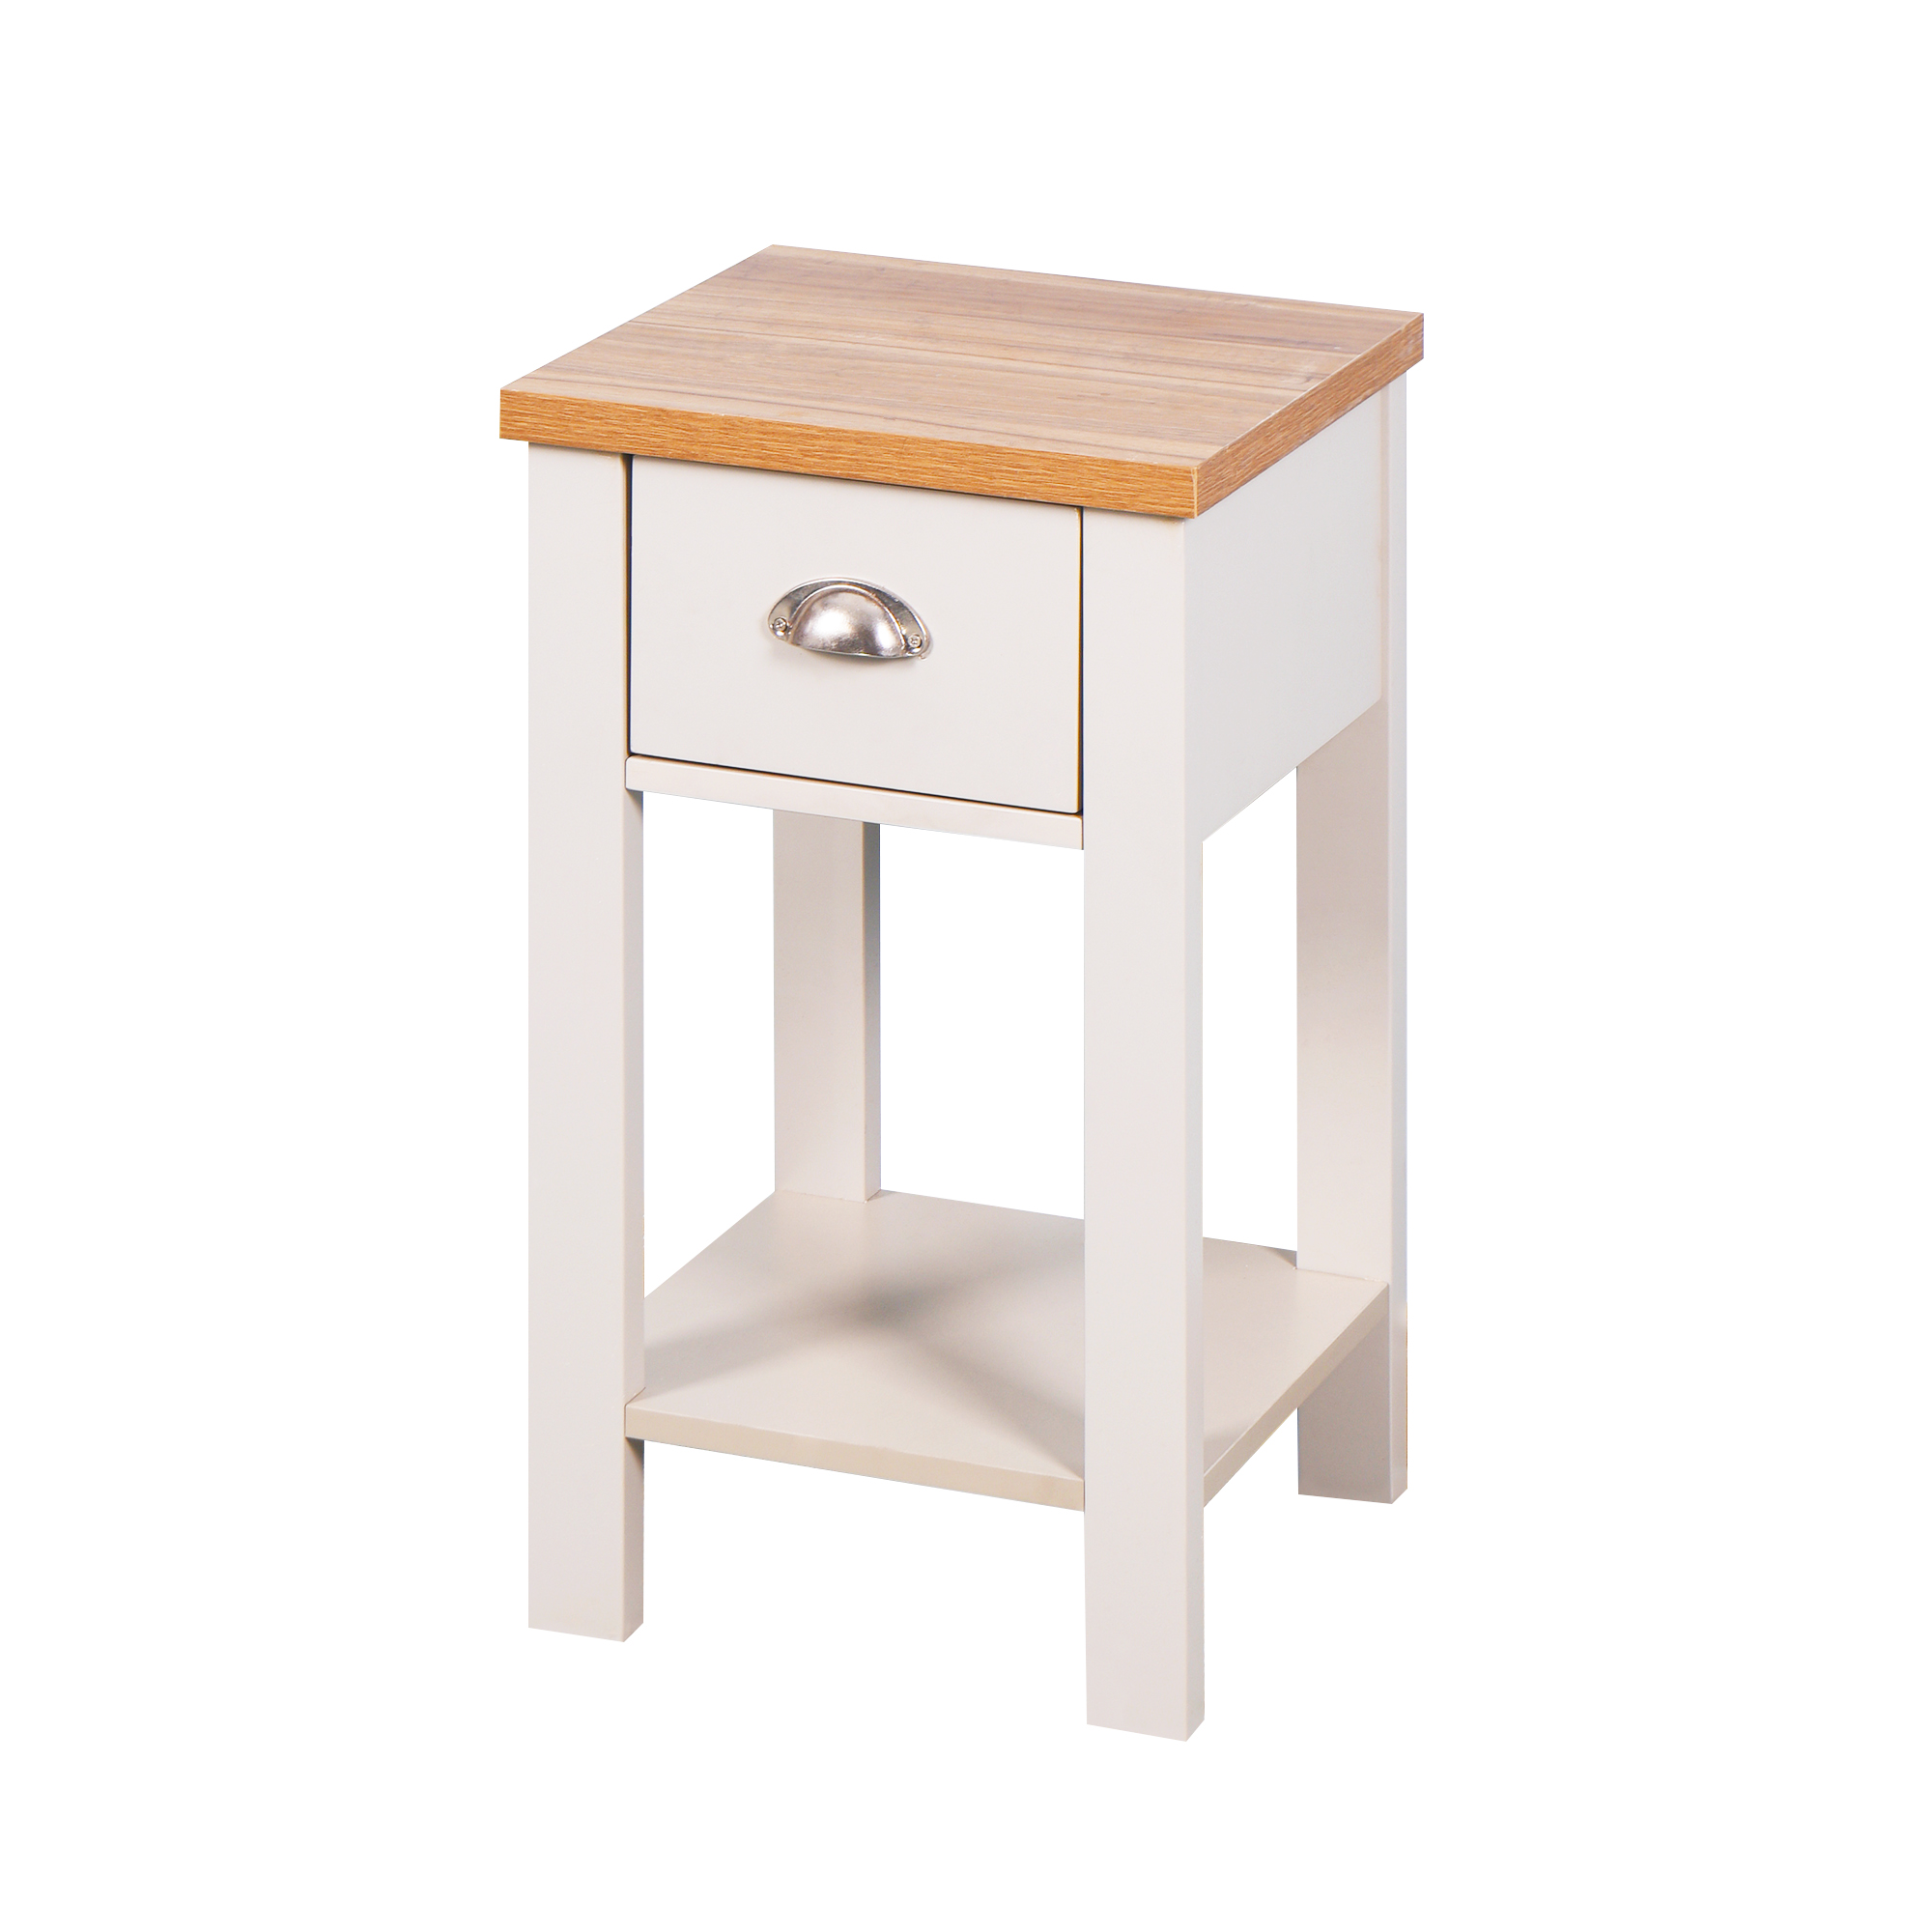 Wooden Living Room Side Table Floor-standing Storage Table with a Drawer